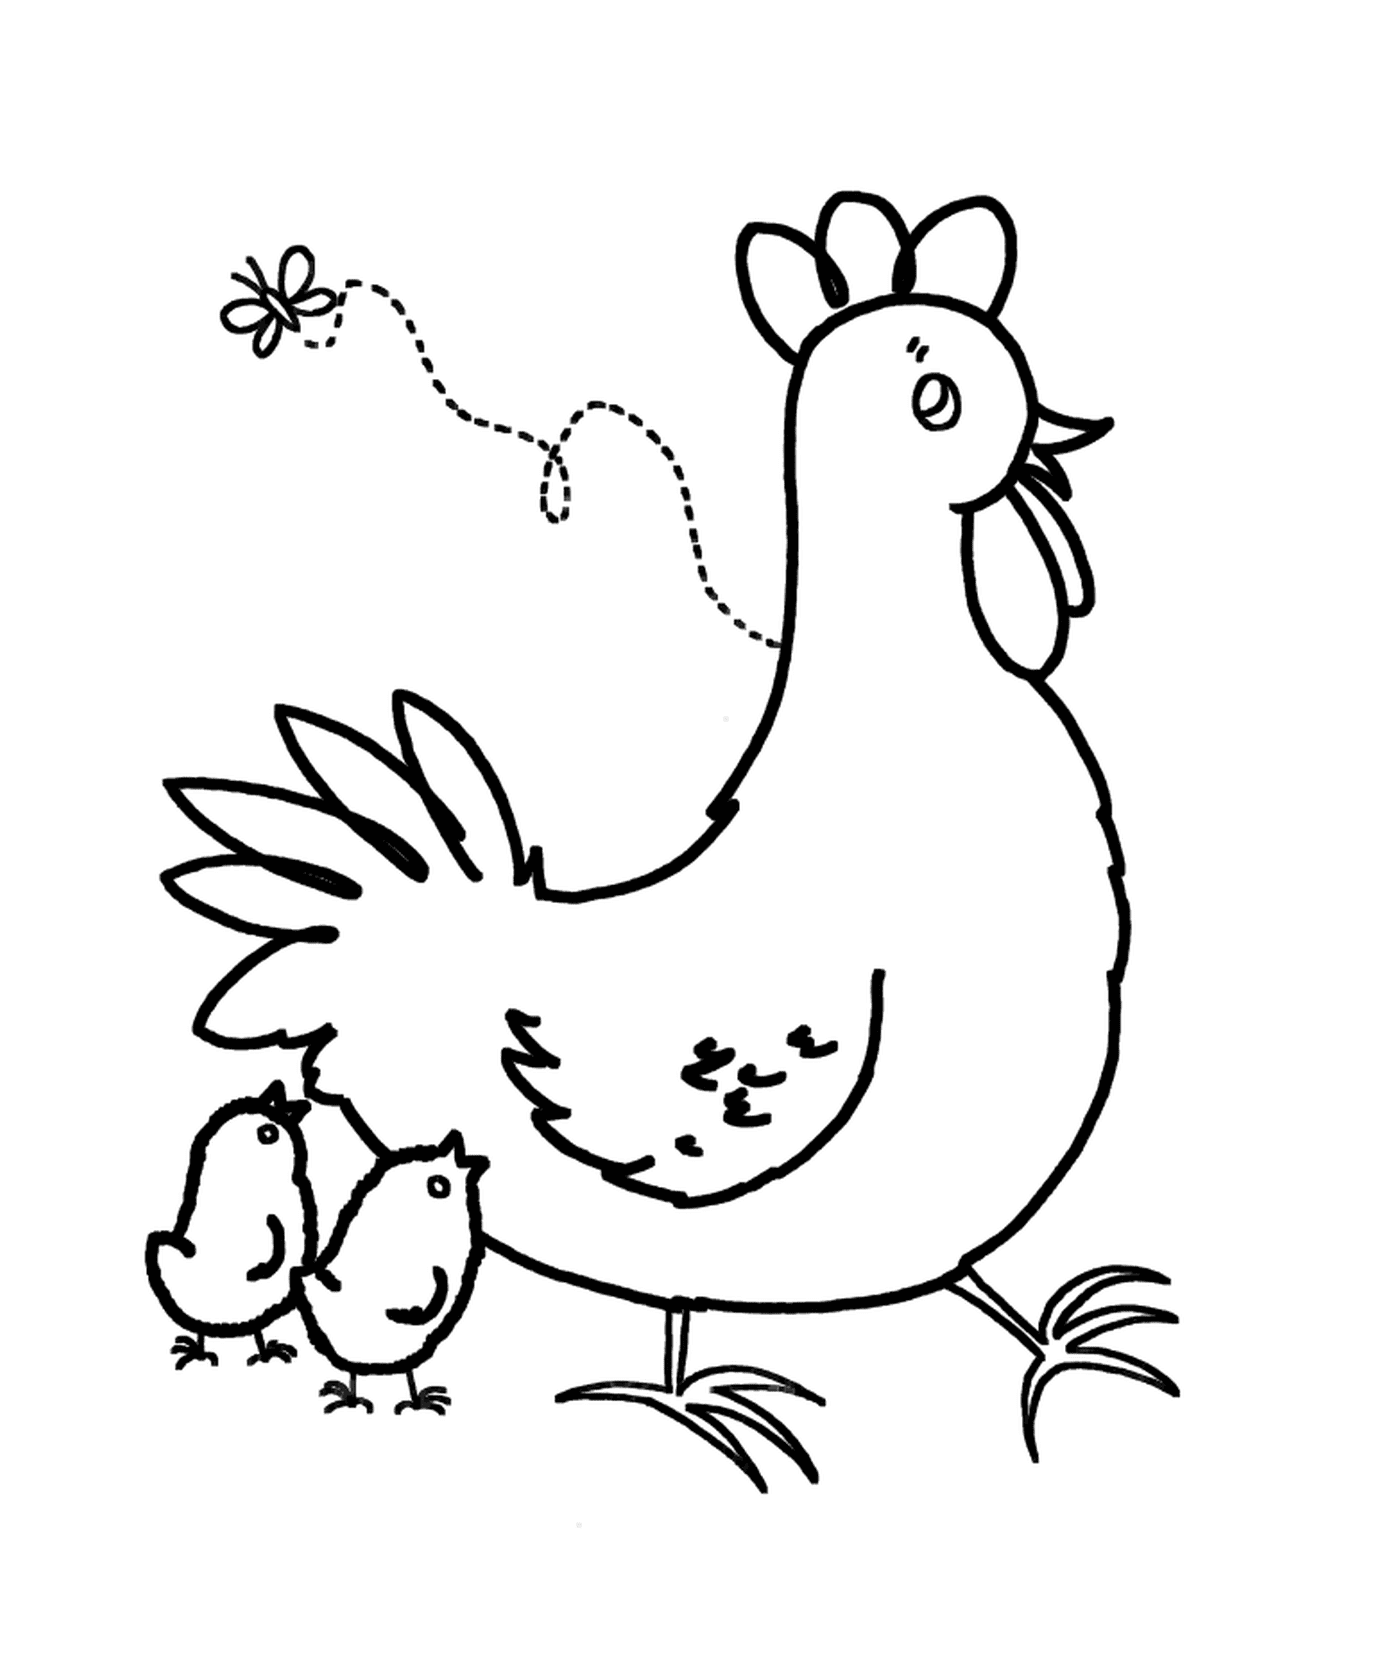  Chicken and chick 